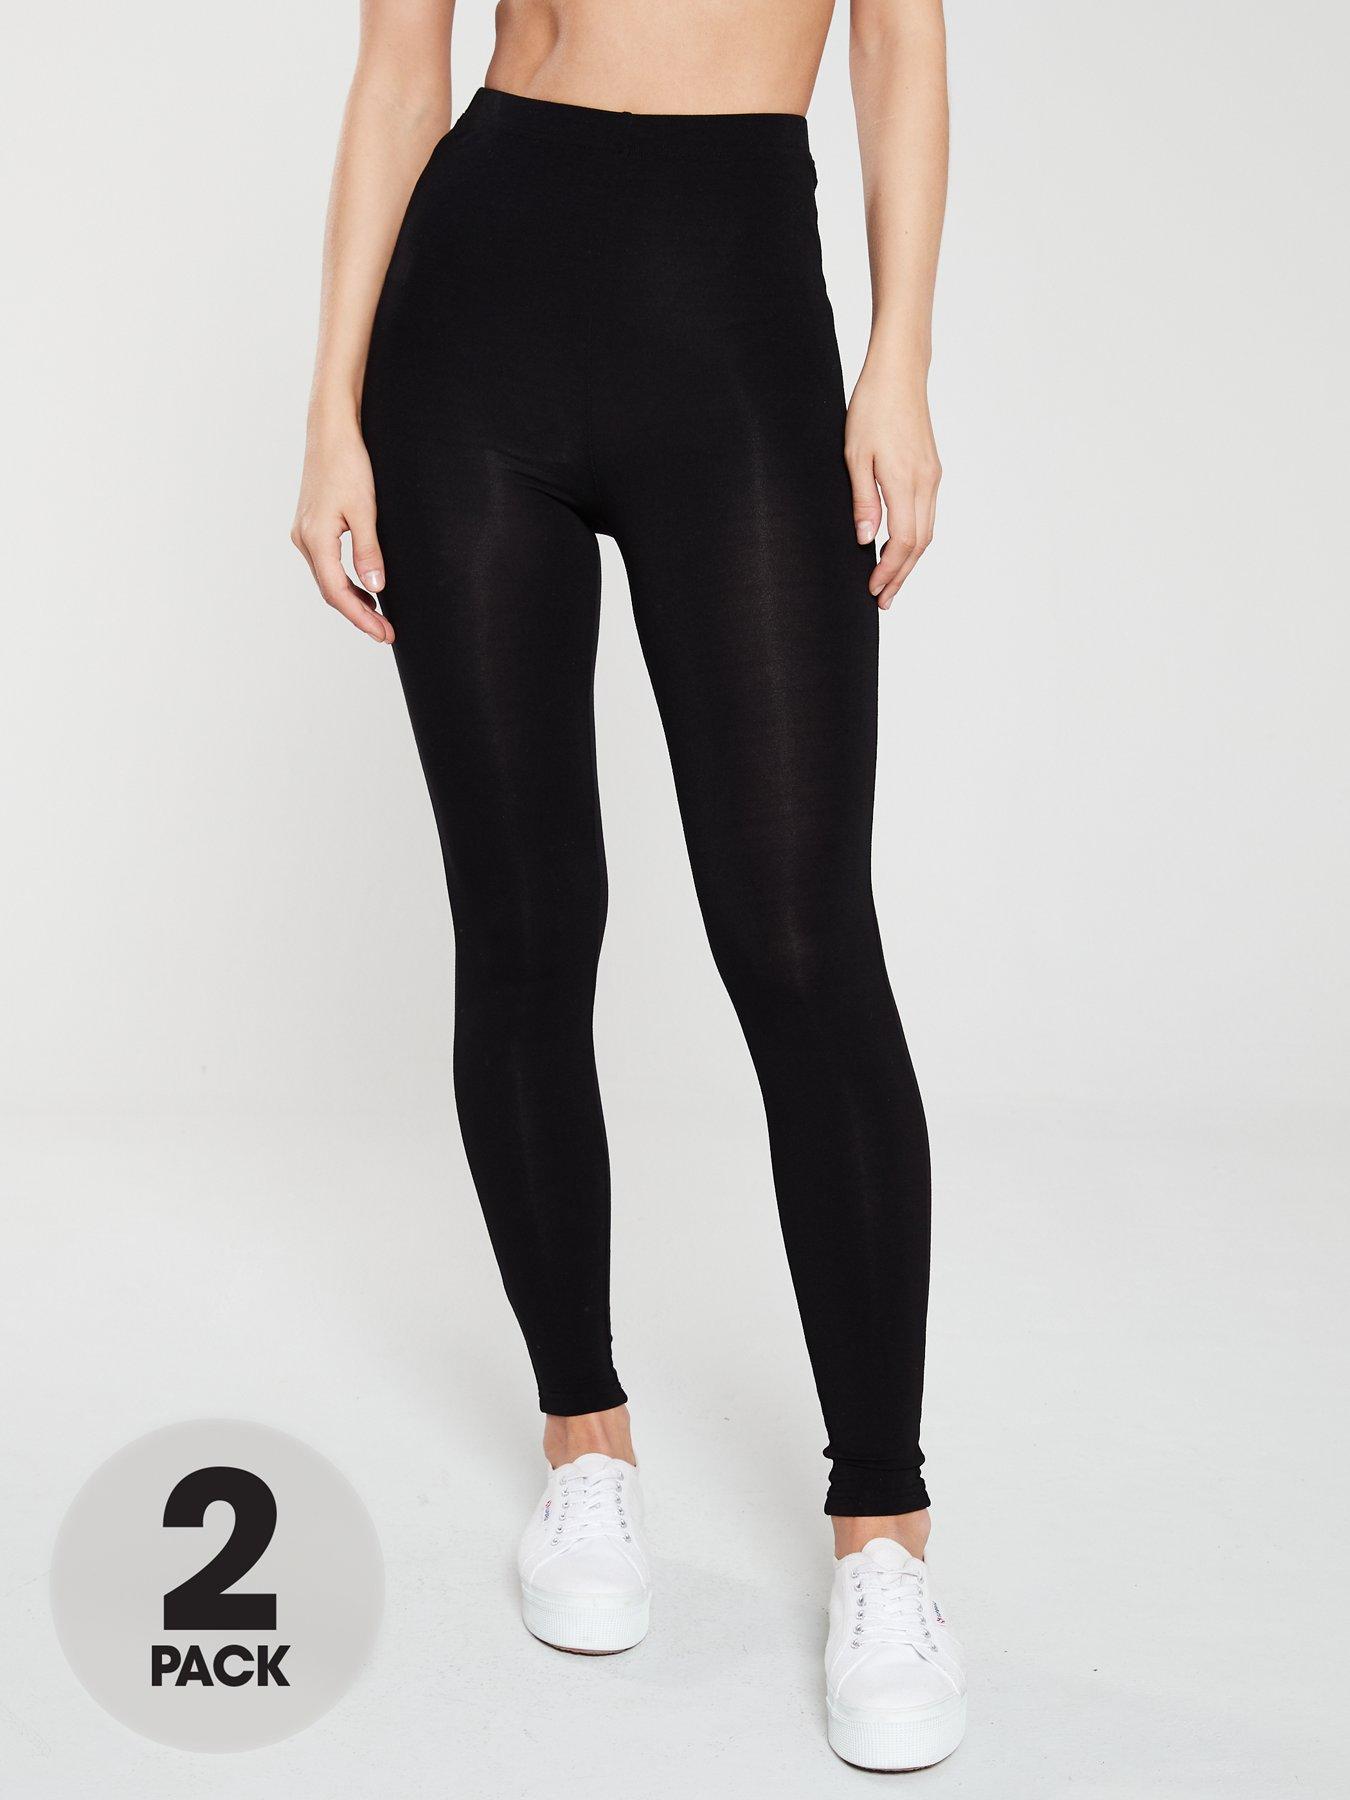 Select Fashion Black 2 PACK Leggings Cotton with Stretch UK 18